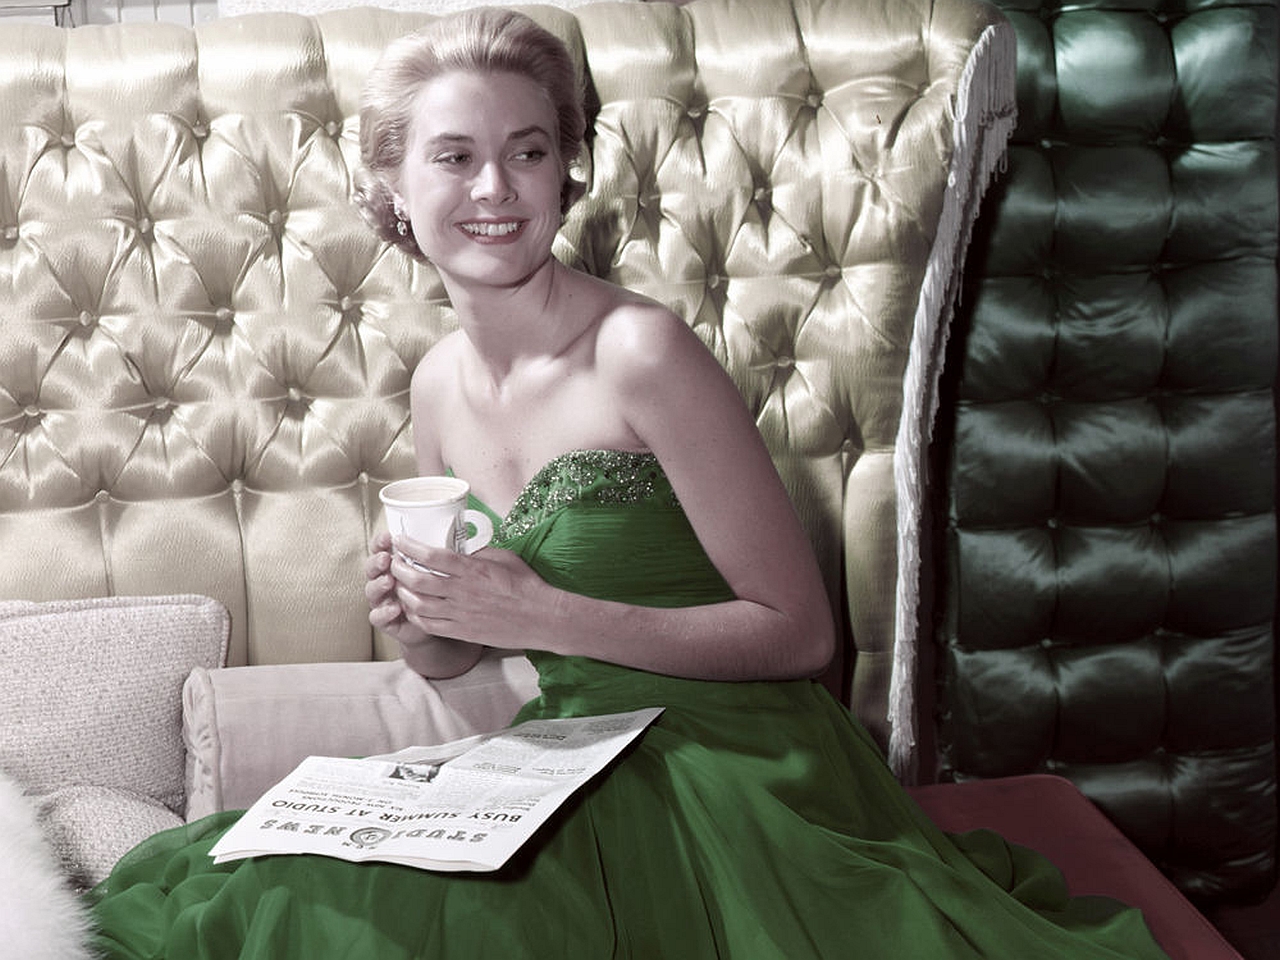 grace kelly Picture